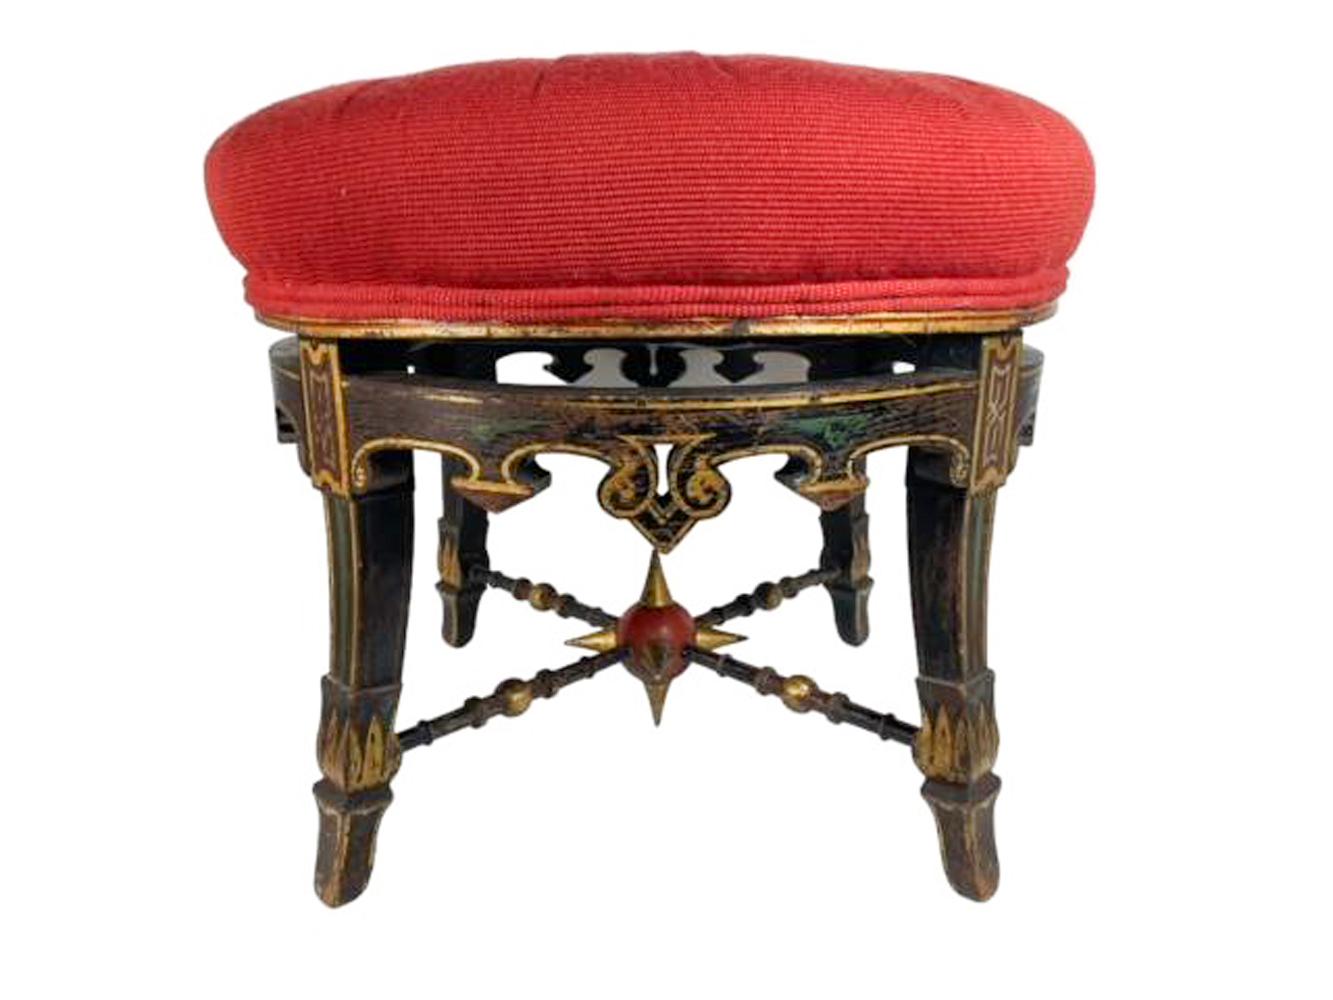 Aesthetic Movement 19th Century American Aesthetic Period Grain Painted Stool with Upholstered Seat For Sale